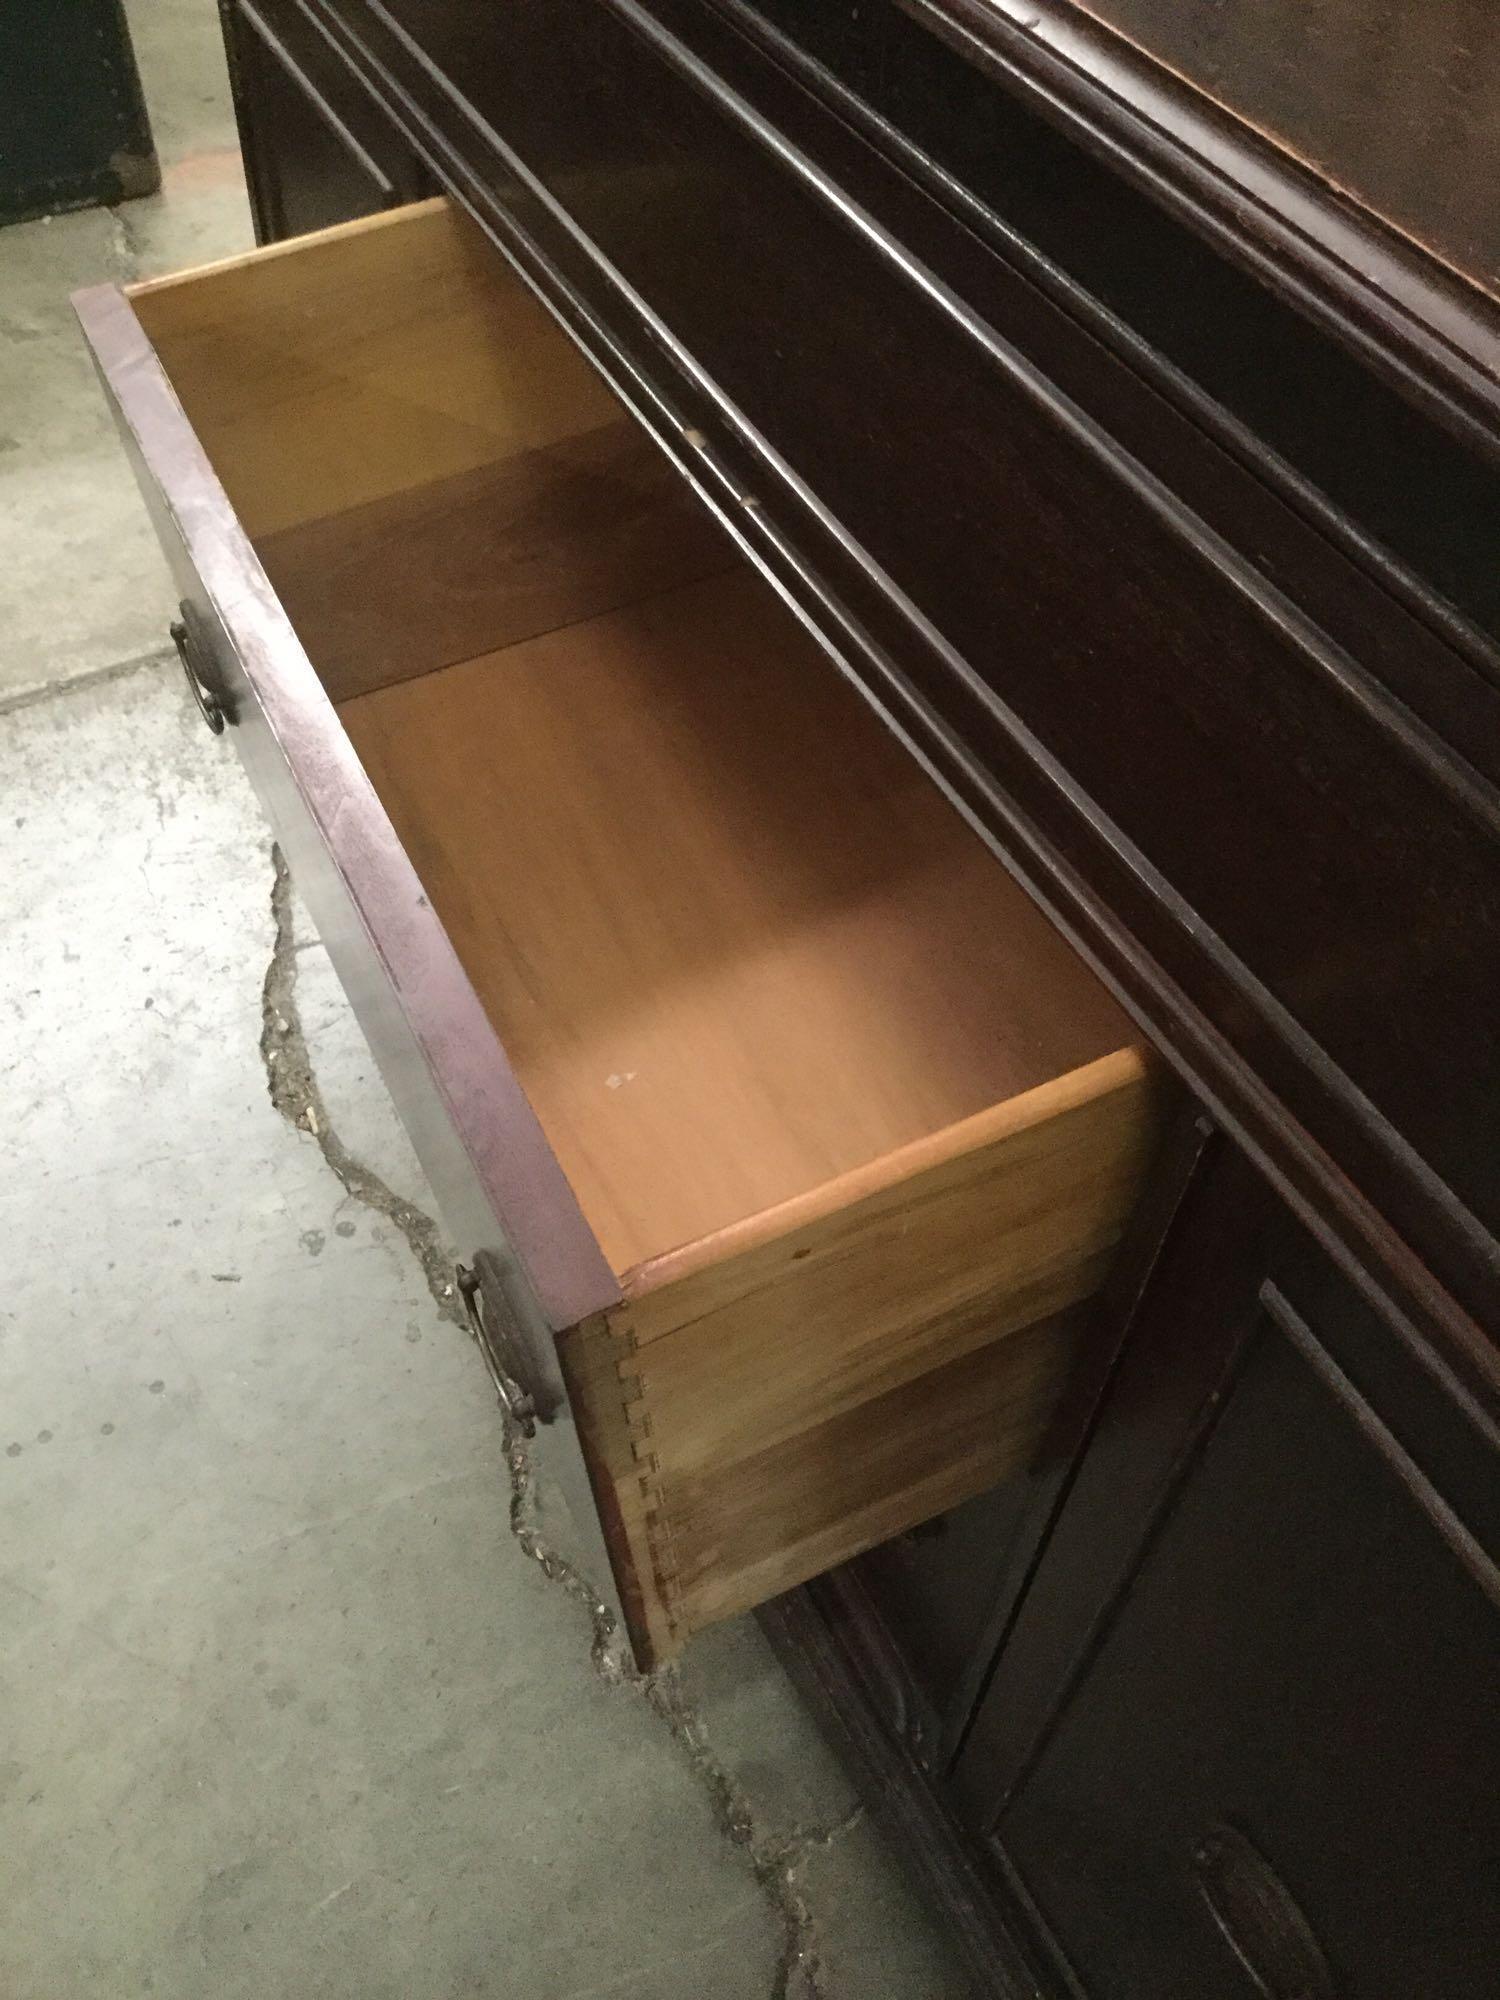 Vintage wooden buffet, shows surface wear, approximately 48x18x37 inches.